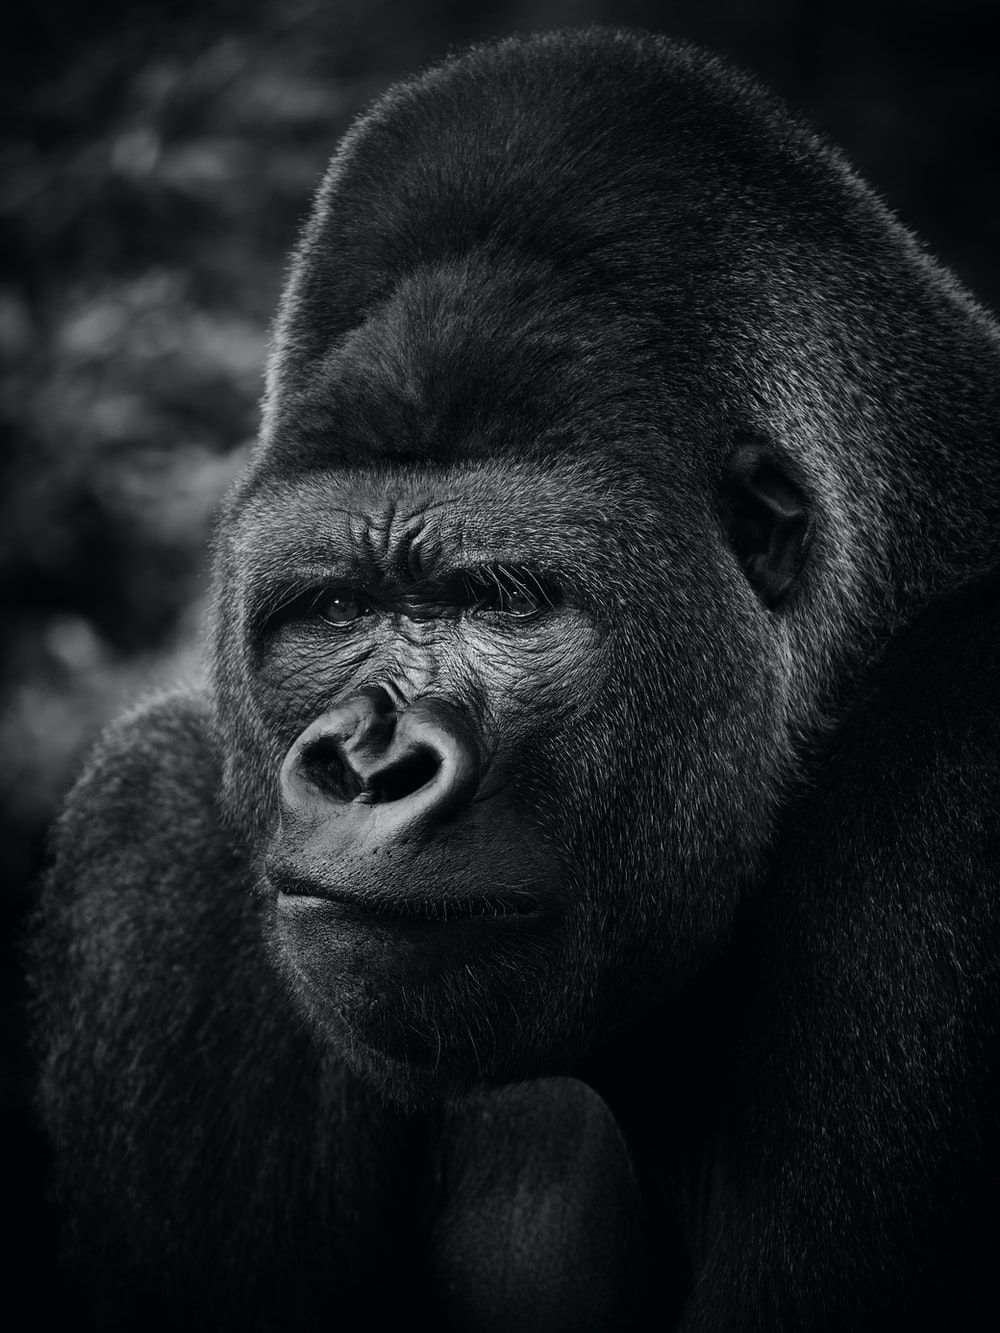 Apes Picture. Download Free Image on .com